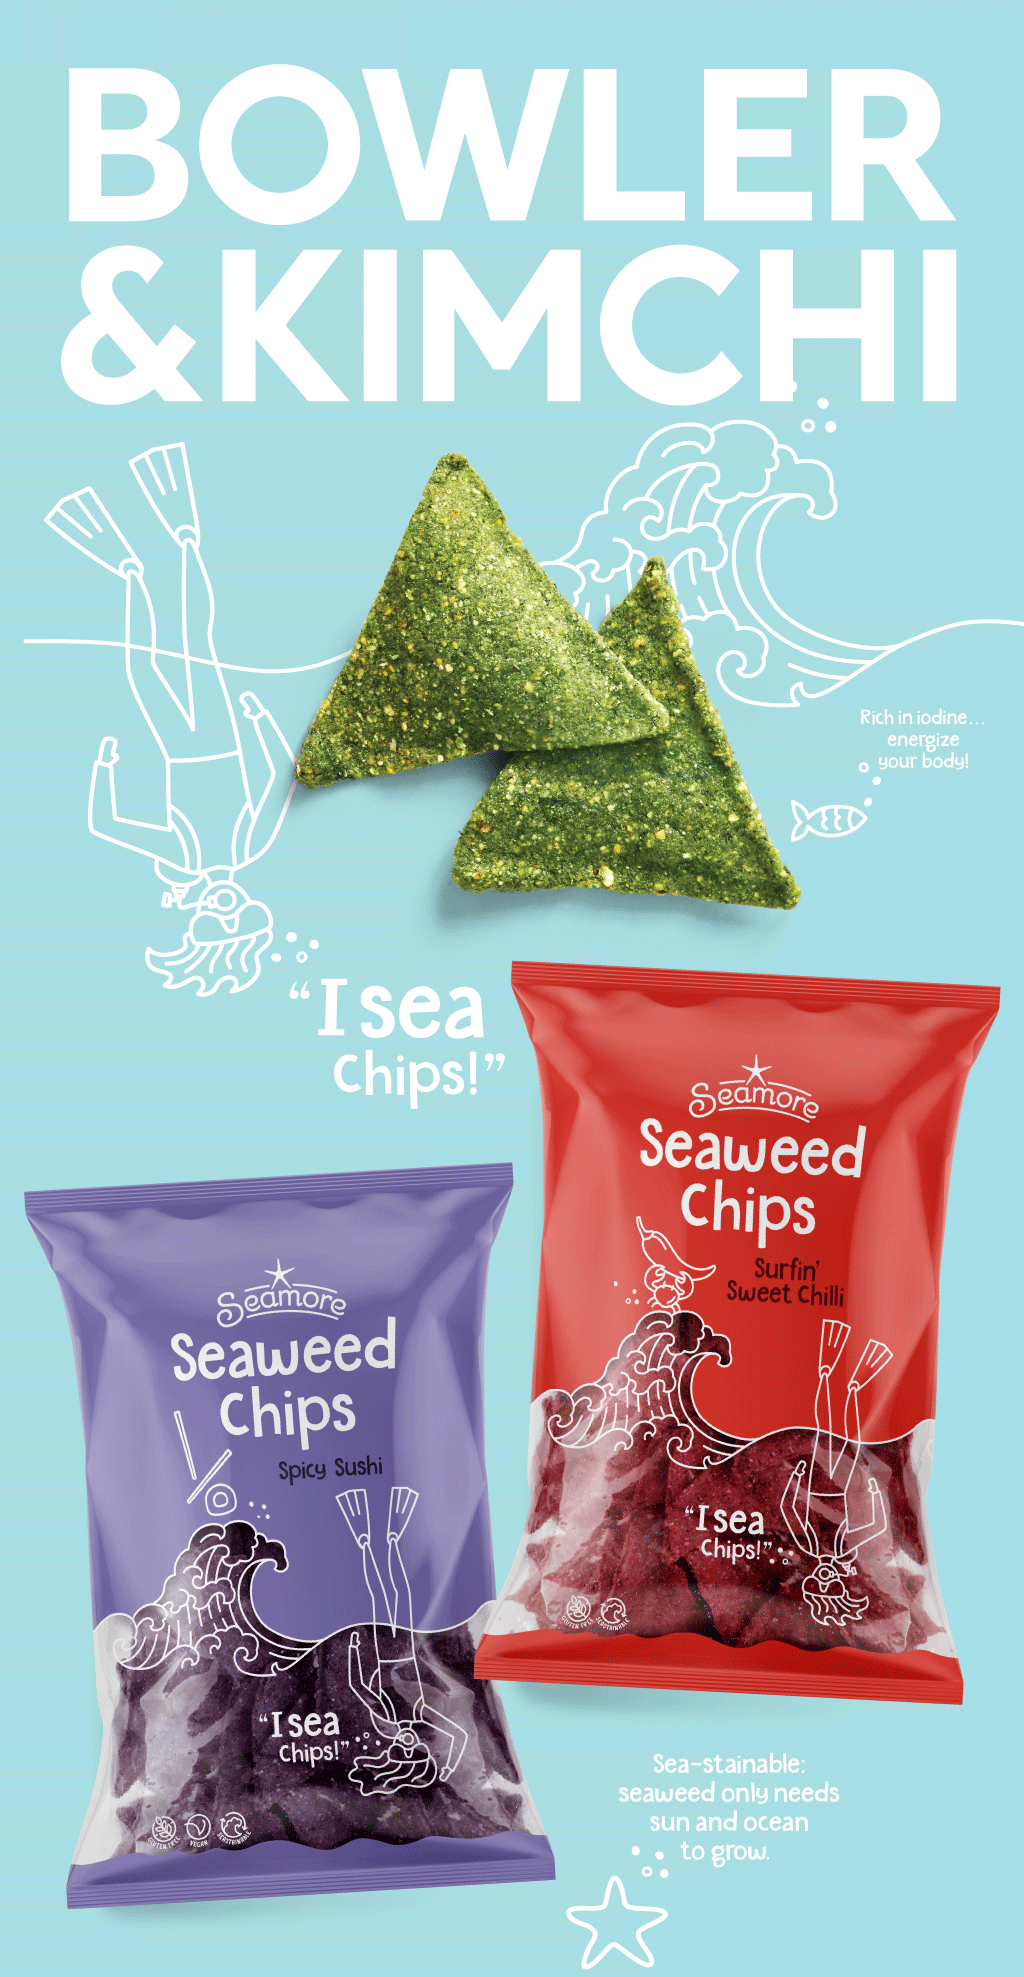 Seamore Seaweed Chips